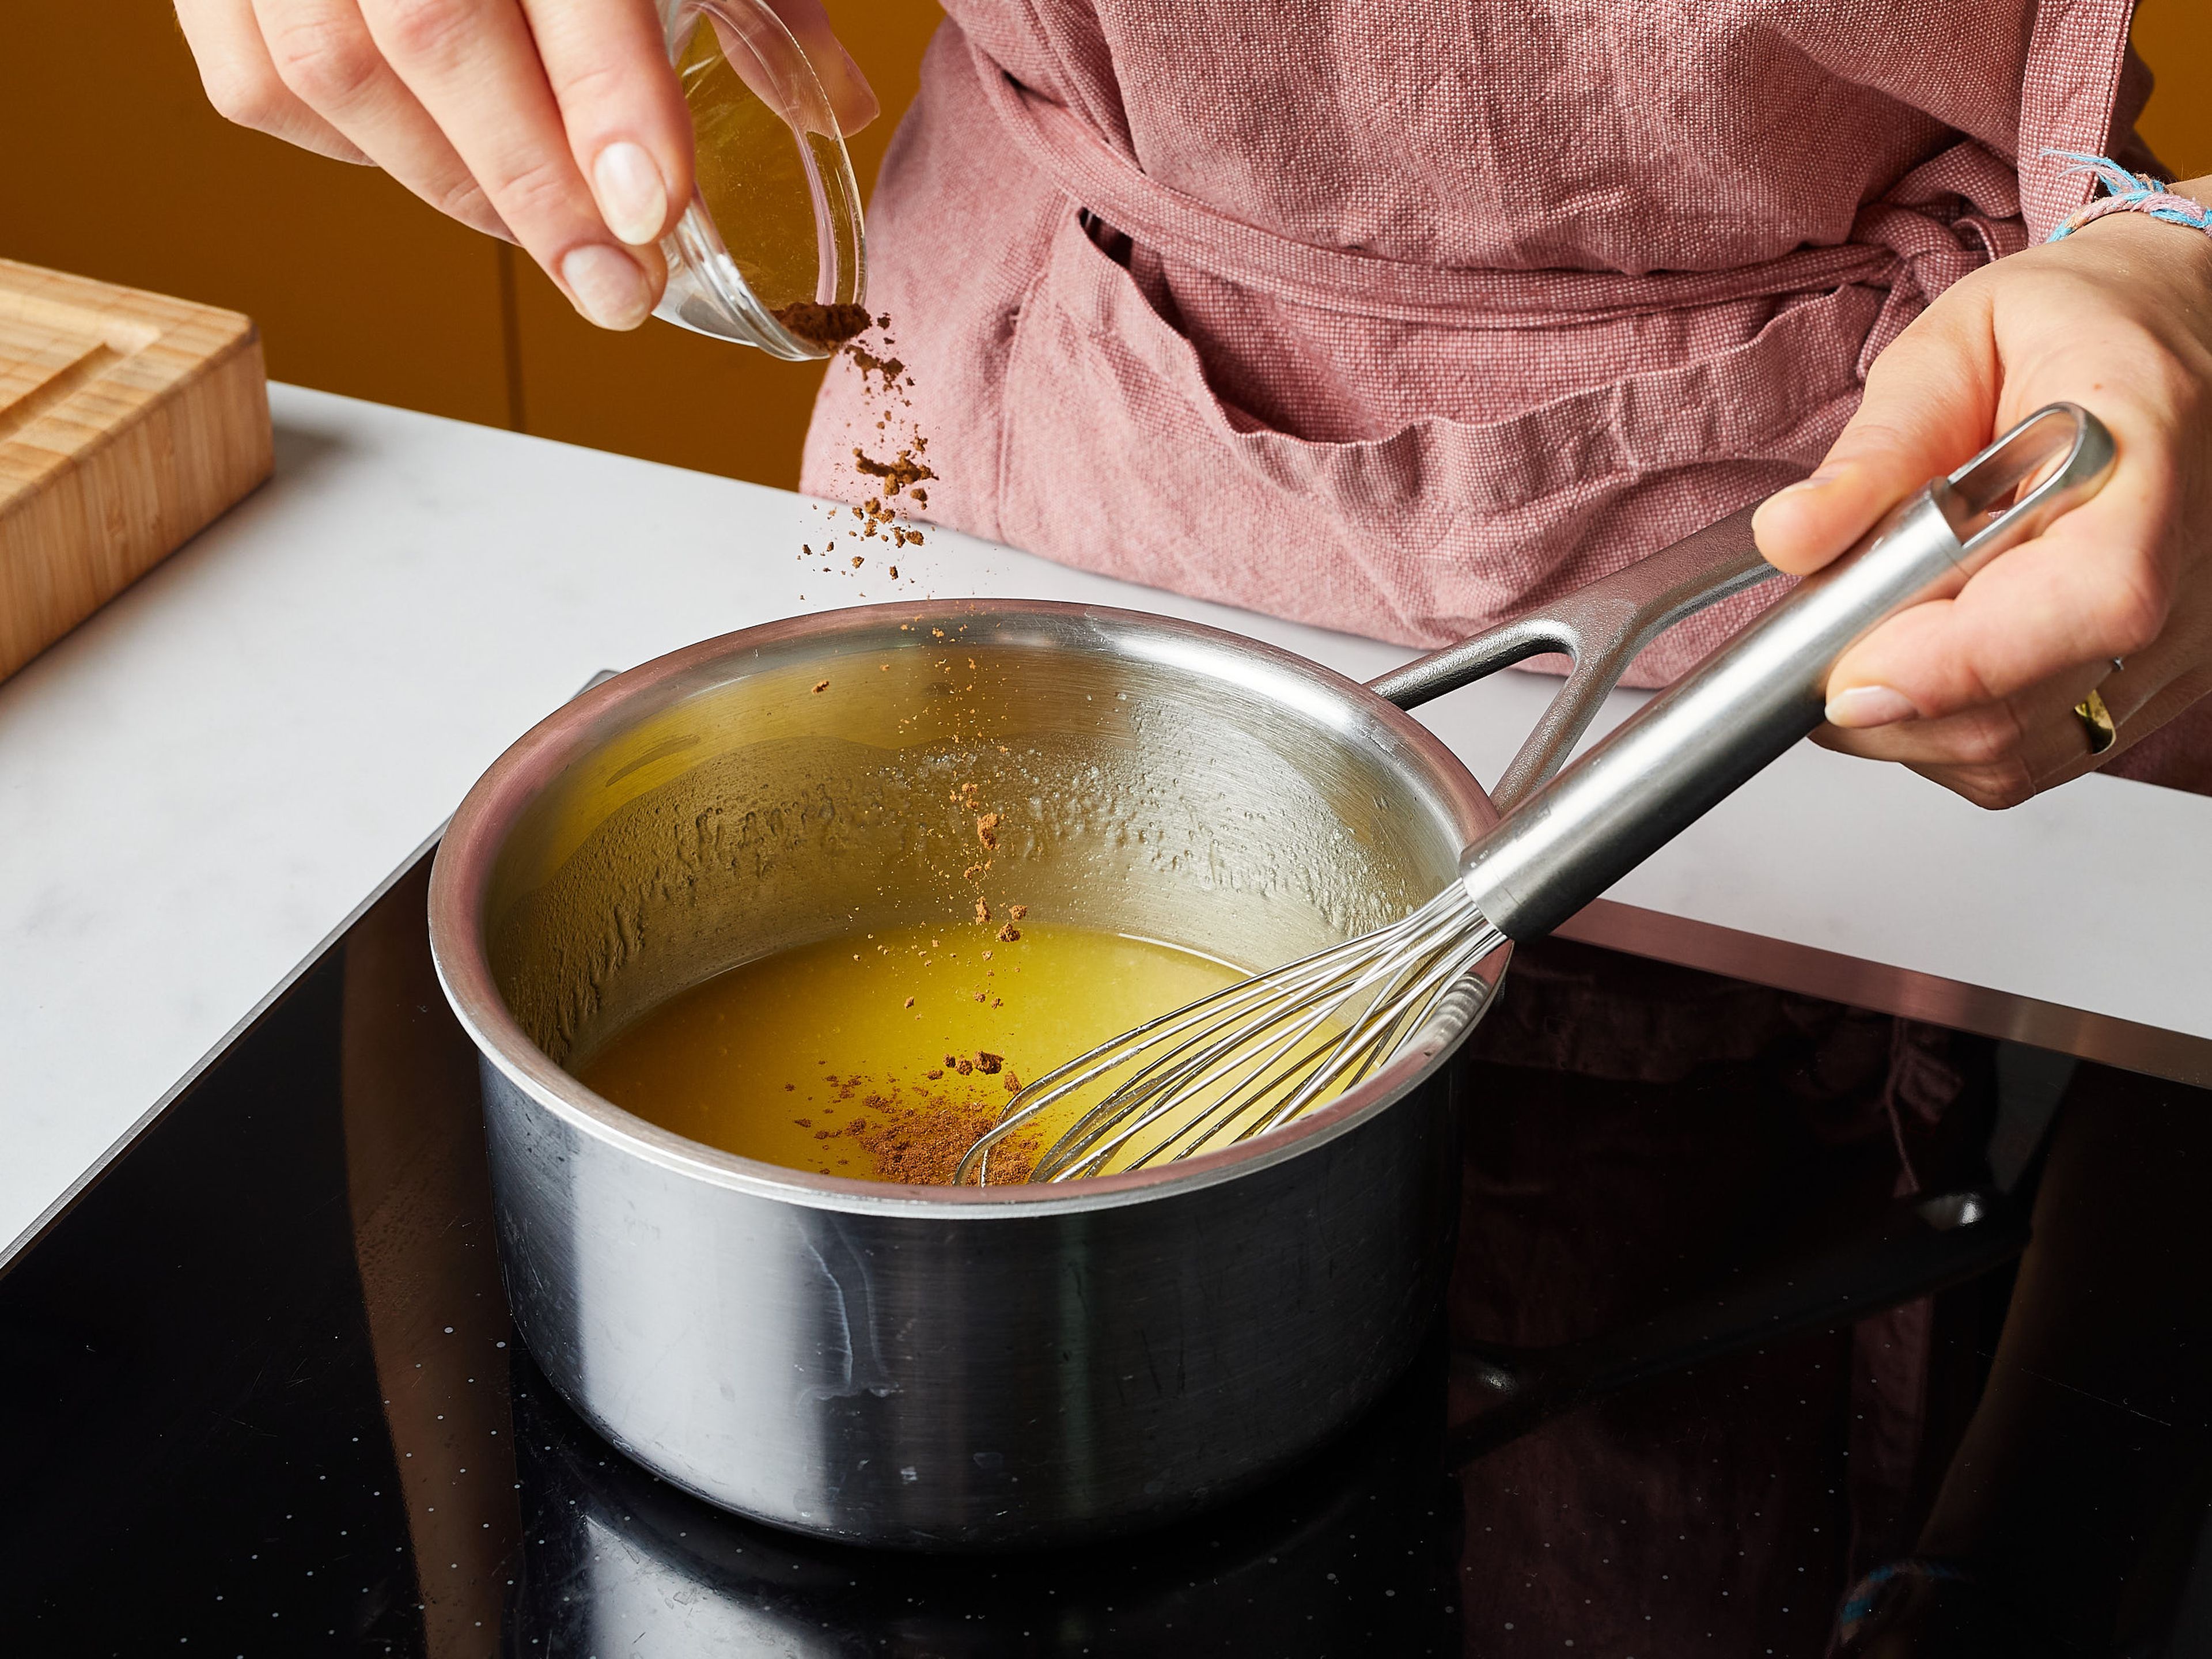 In the meantime, stir together the icing. Put the butter, remaining sugar, vanilla sugar, remaining milk, and cinnamon in a small saucepan, and heat over medium-low heat. Whisk until the sugar has dissolved.